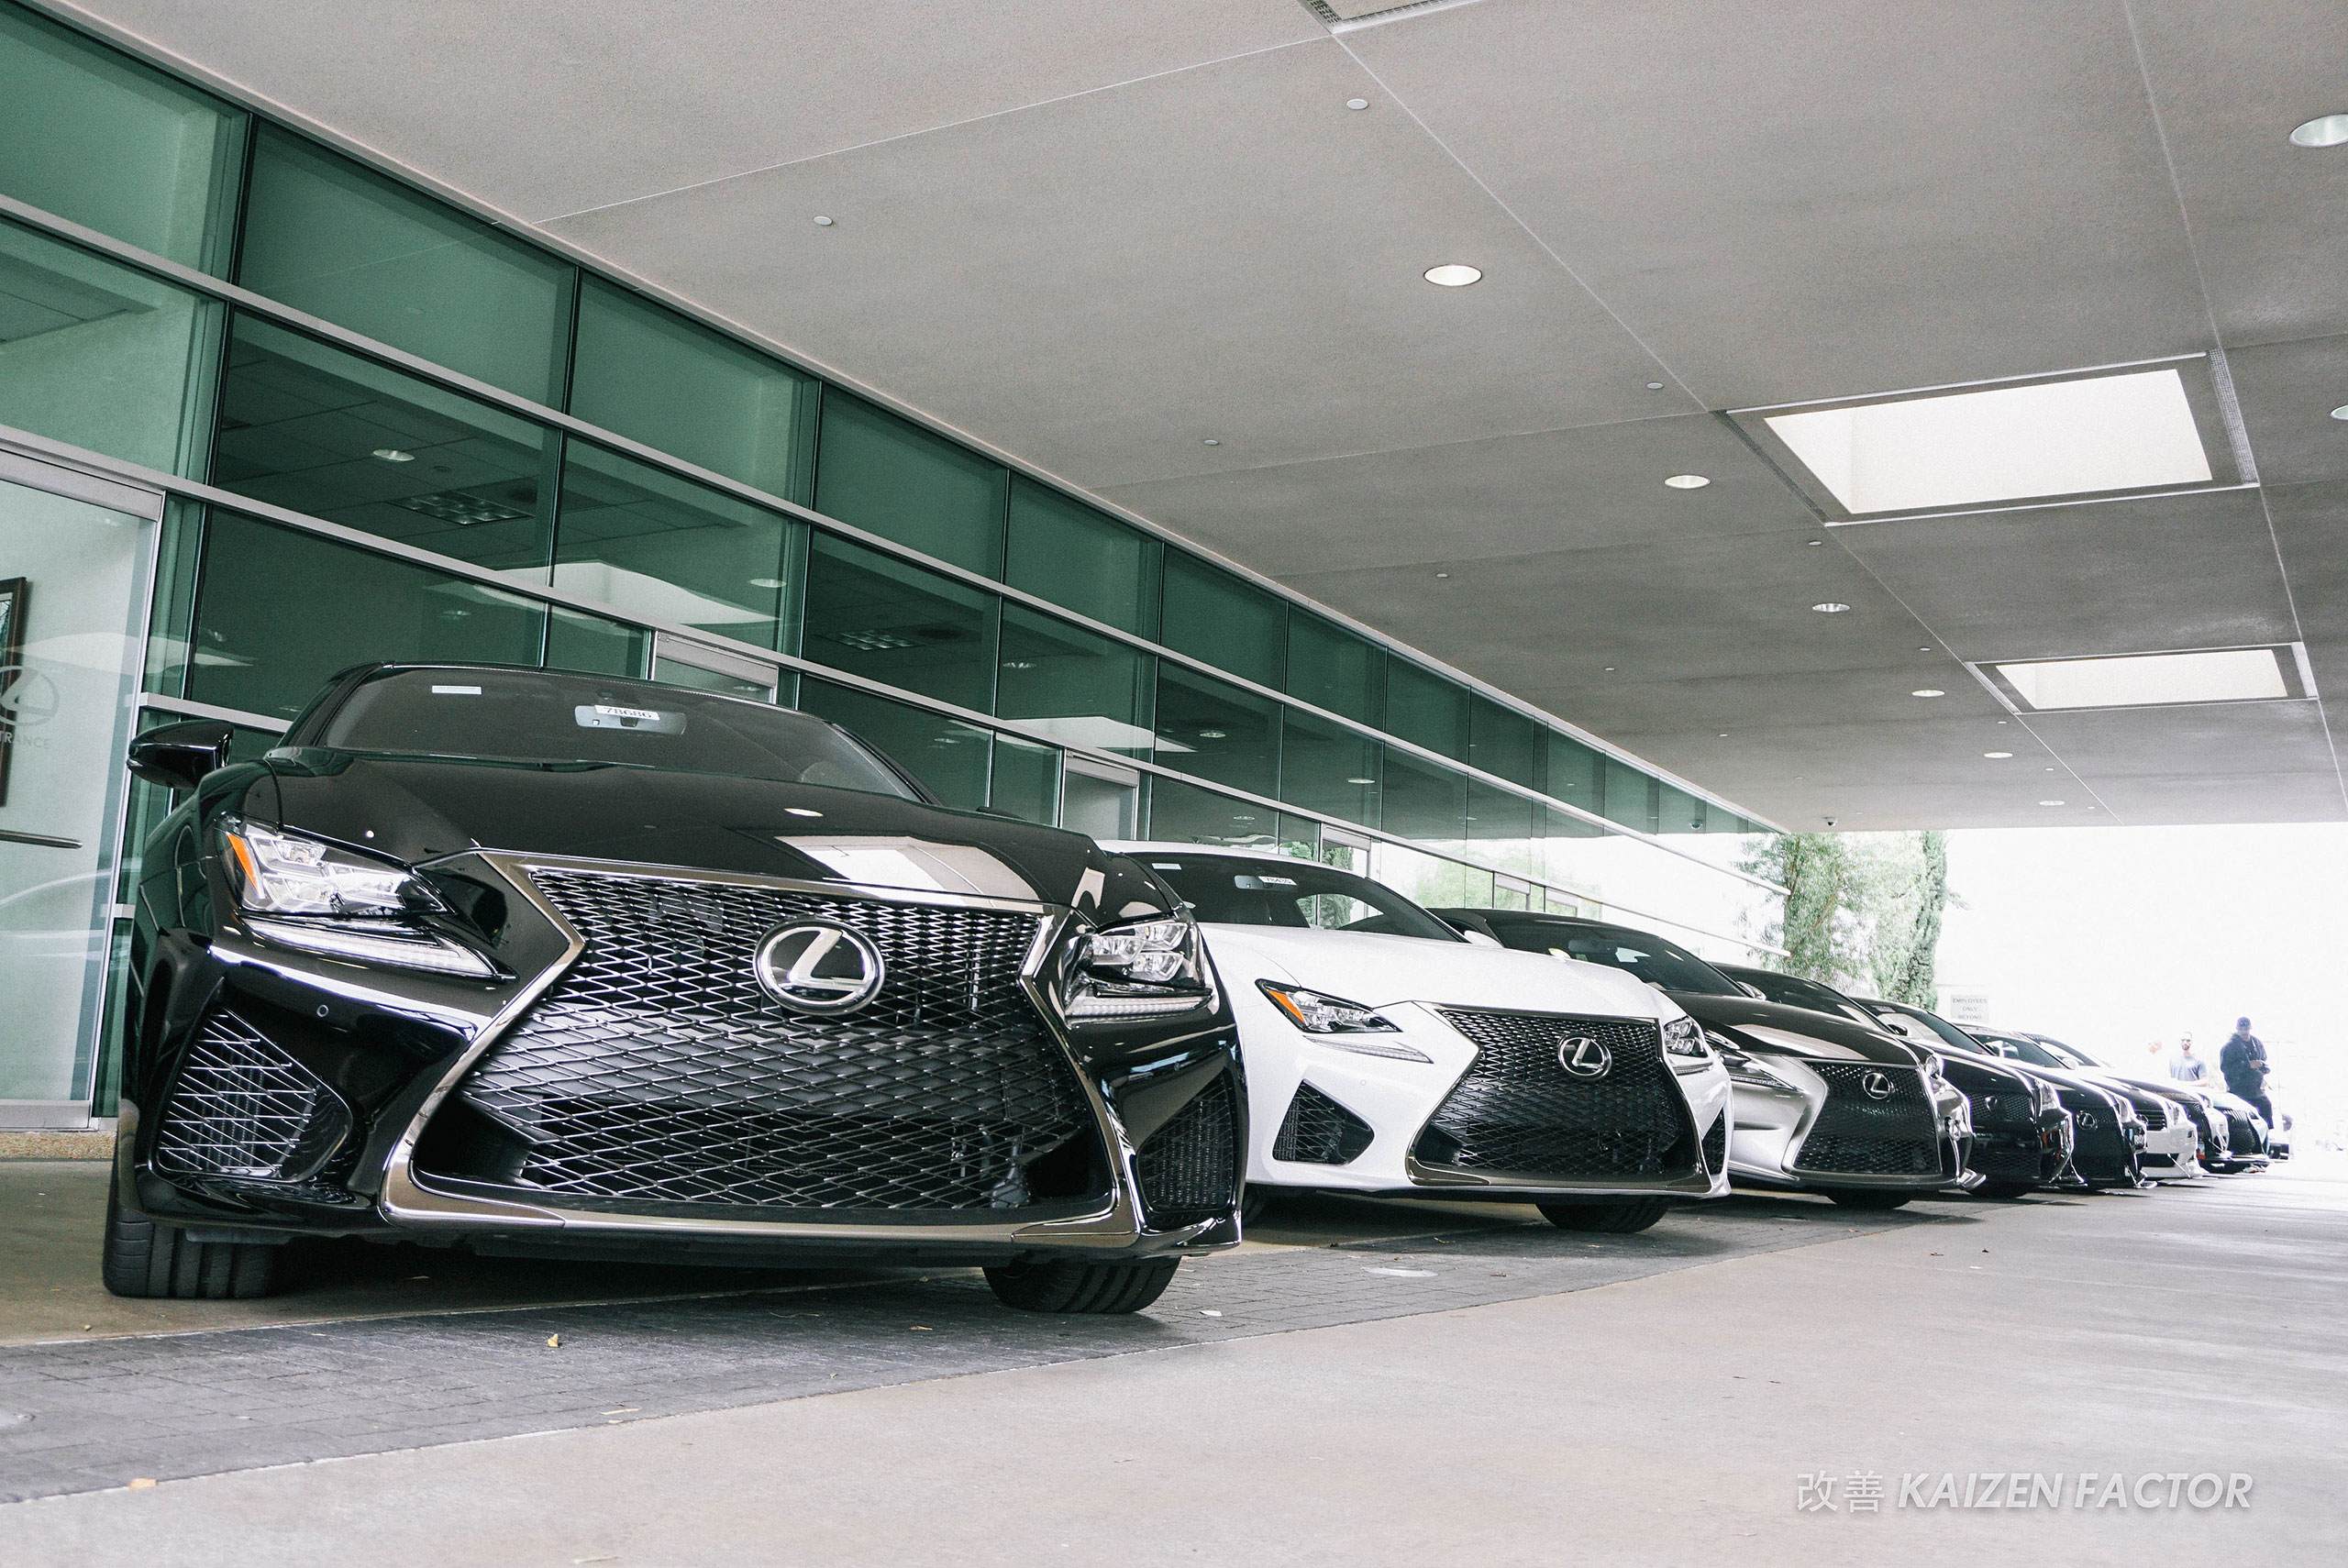 Photo Gallery The Lexus of Westminster Car Meet in Southern California